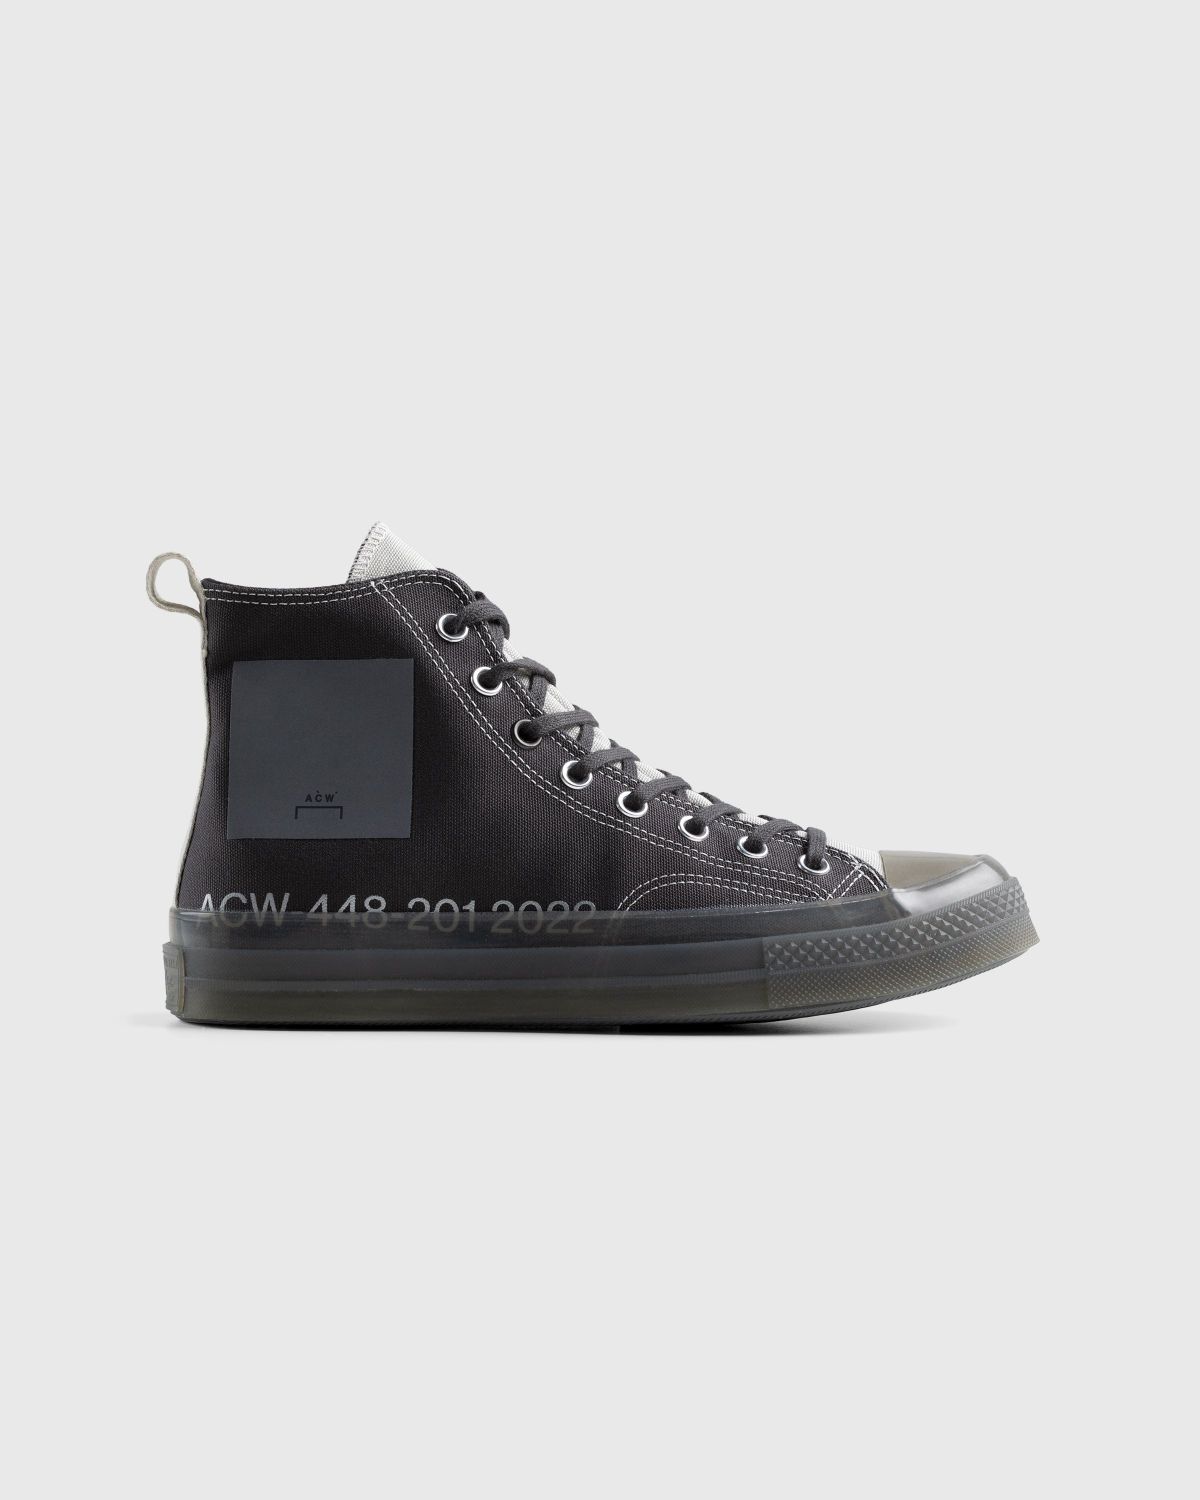 Converse x A-Cold-Wall* – Chuck 70 Hi Pavement/Silver Birch - High Top Sneakers - Black - Image 1